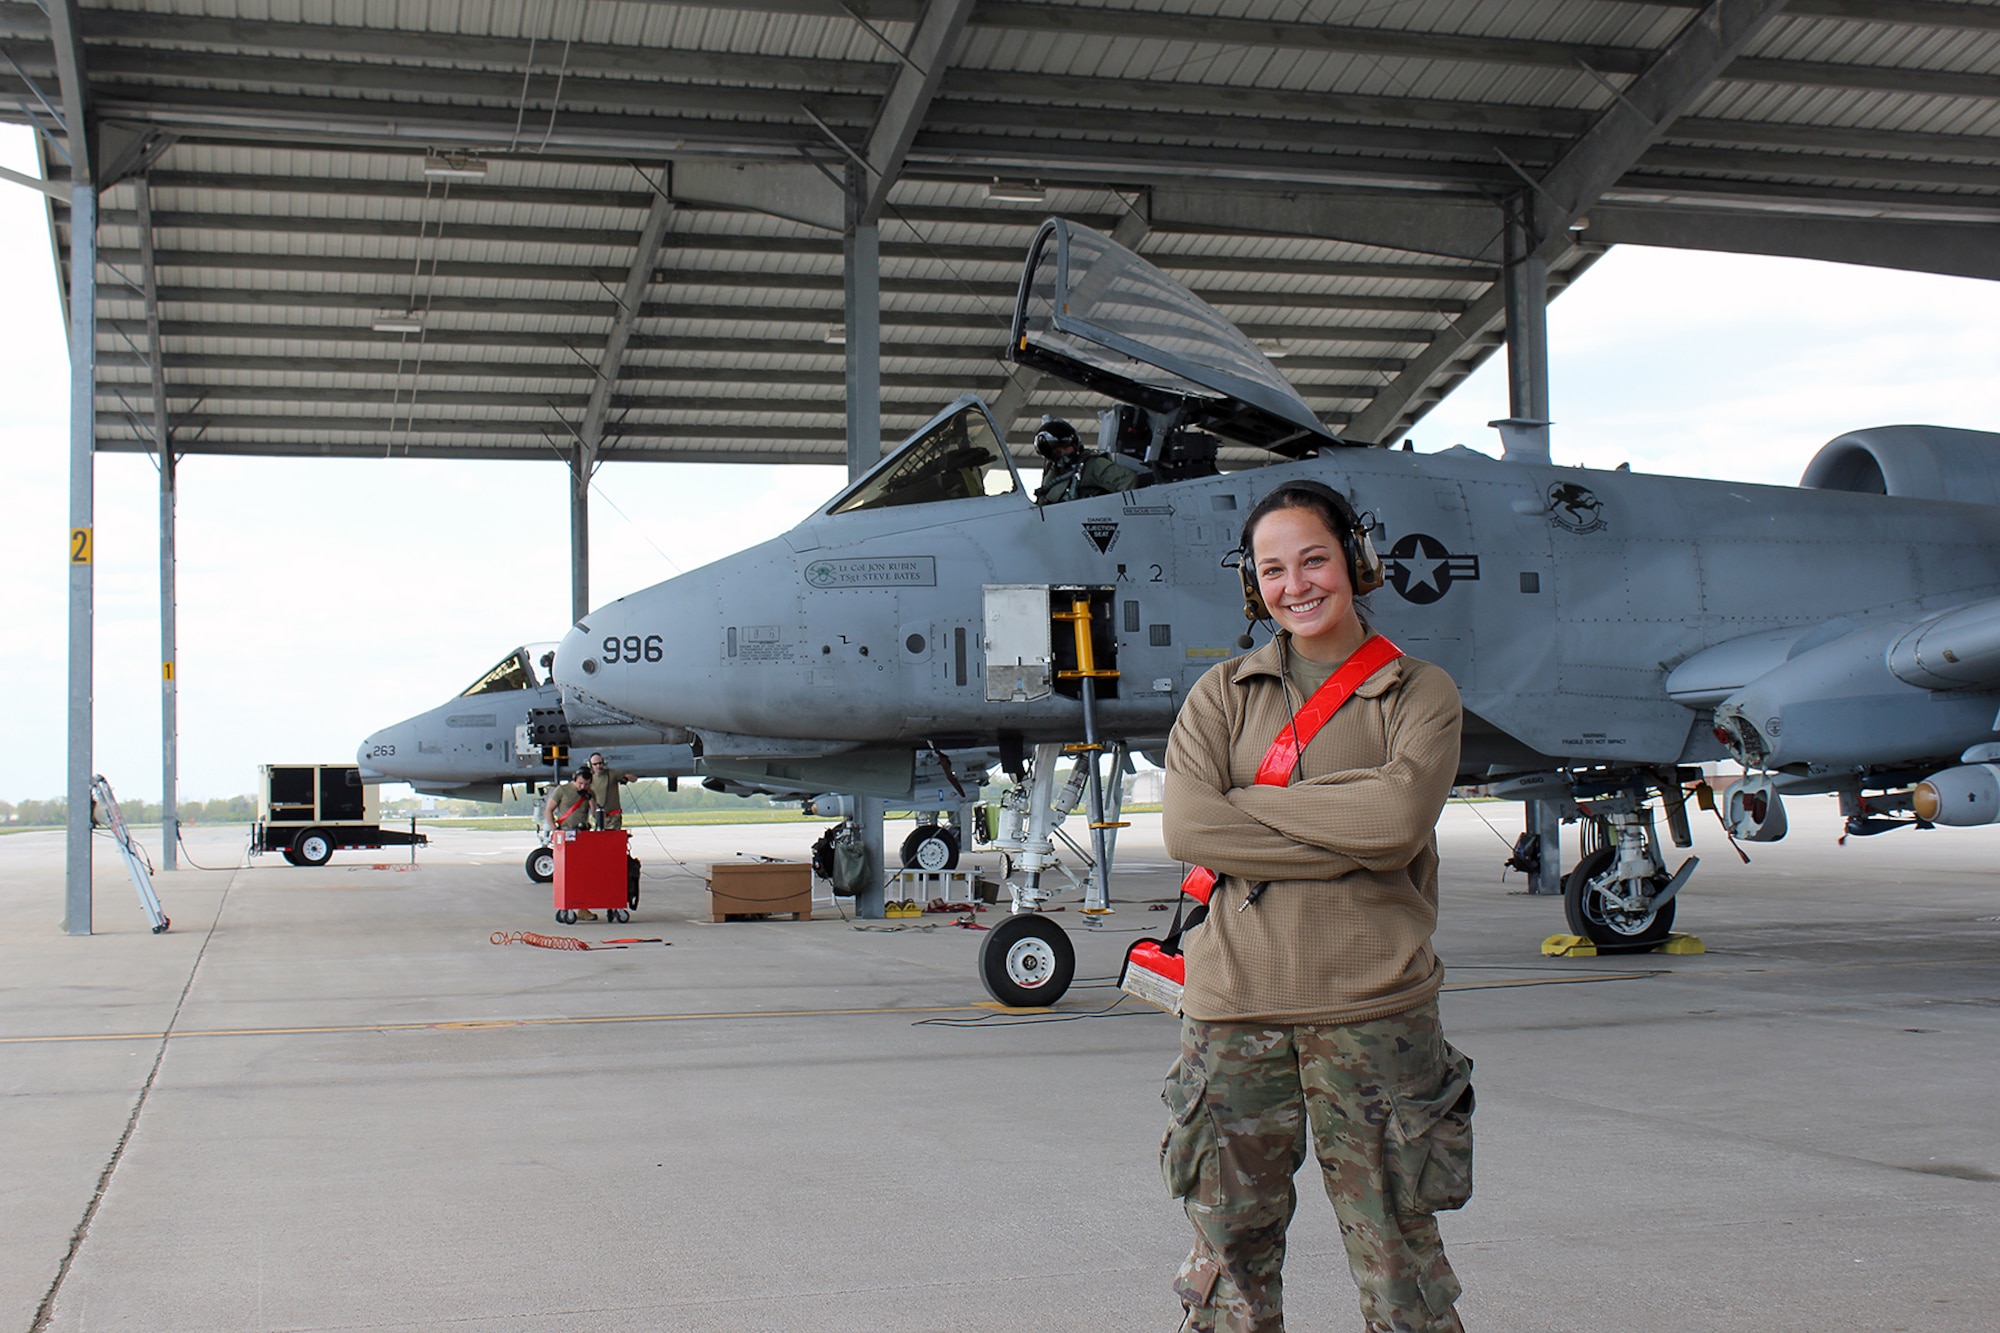 Airman 1st Class Juliann Hammer is seen next to an A-10 Thunderbolt II aircraft at Selfridge Air National Guard Base, Mich., May 16, 2021. Hammer is a crew chief on the A-10. She is also a student at Michigan State University. (U.S. Air National Guard photo by Master Sgt. Dan Heaton)